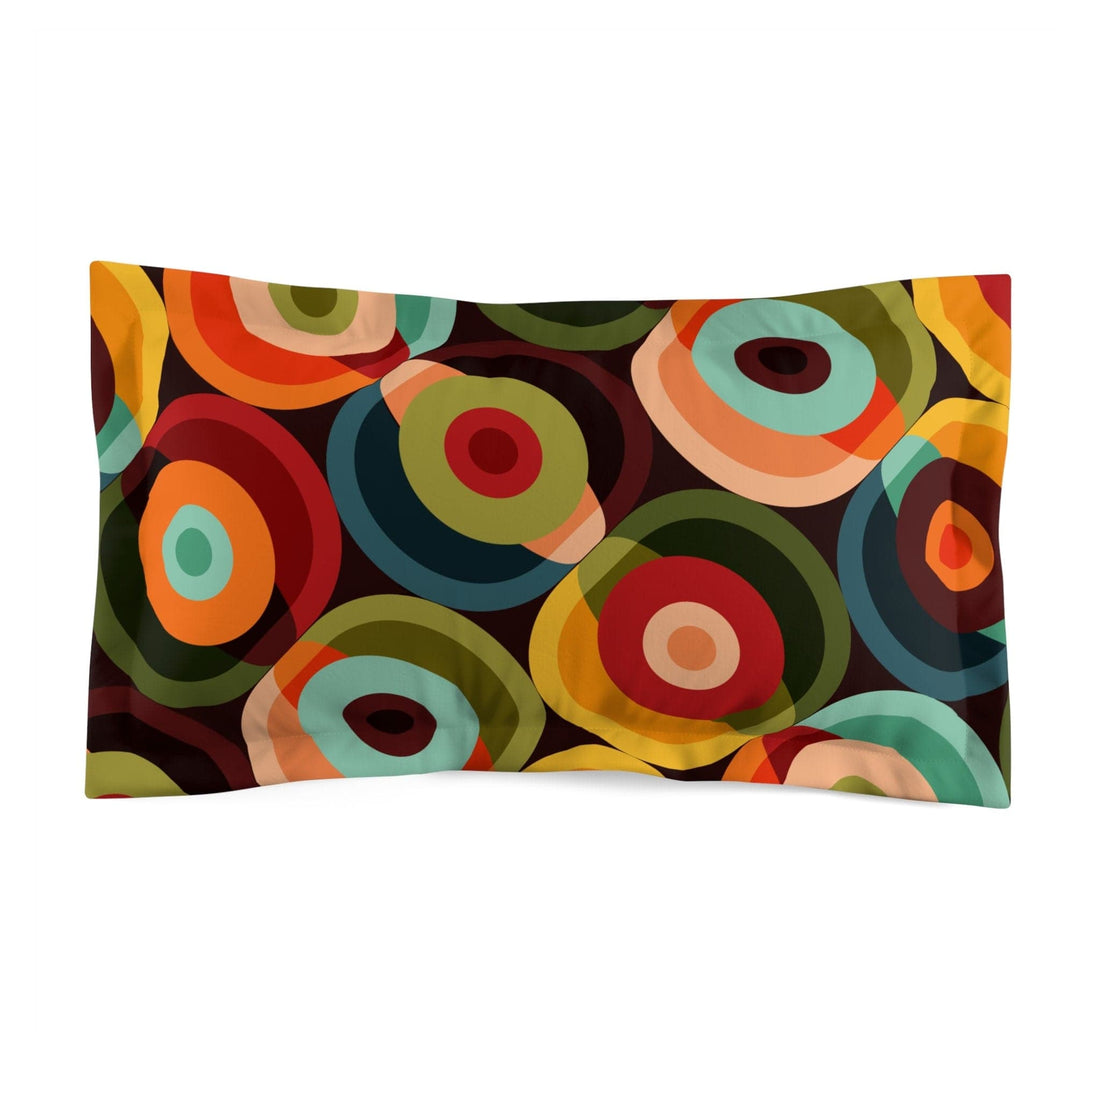 Kate McEnroe New York Retro Groovy Geometric Circle Orbs Pillow Sham, 70s Mid Century Modern Psychedelic Abstract Bedroom Pillow Cover - 132682823Pillow Shams26144799988911770348